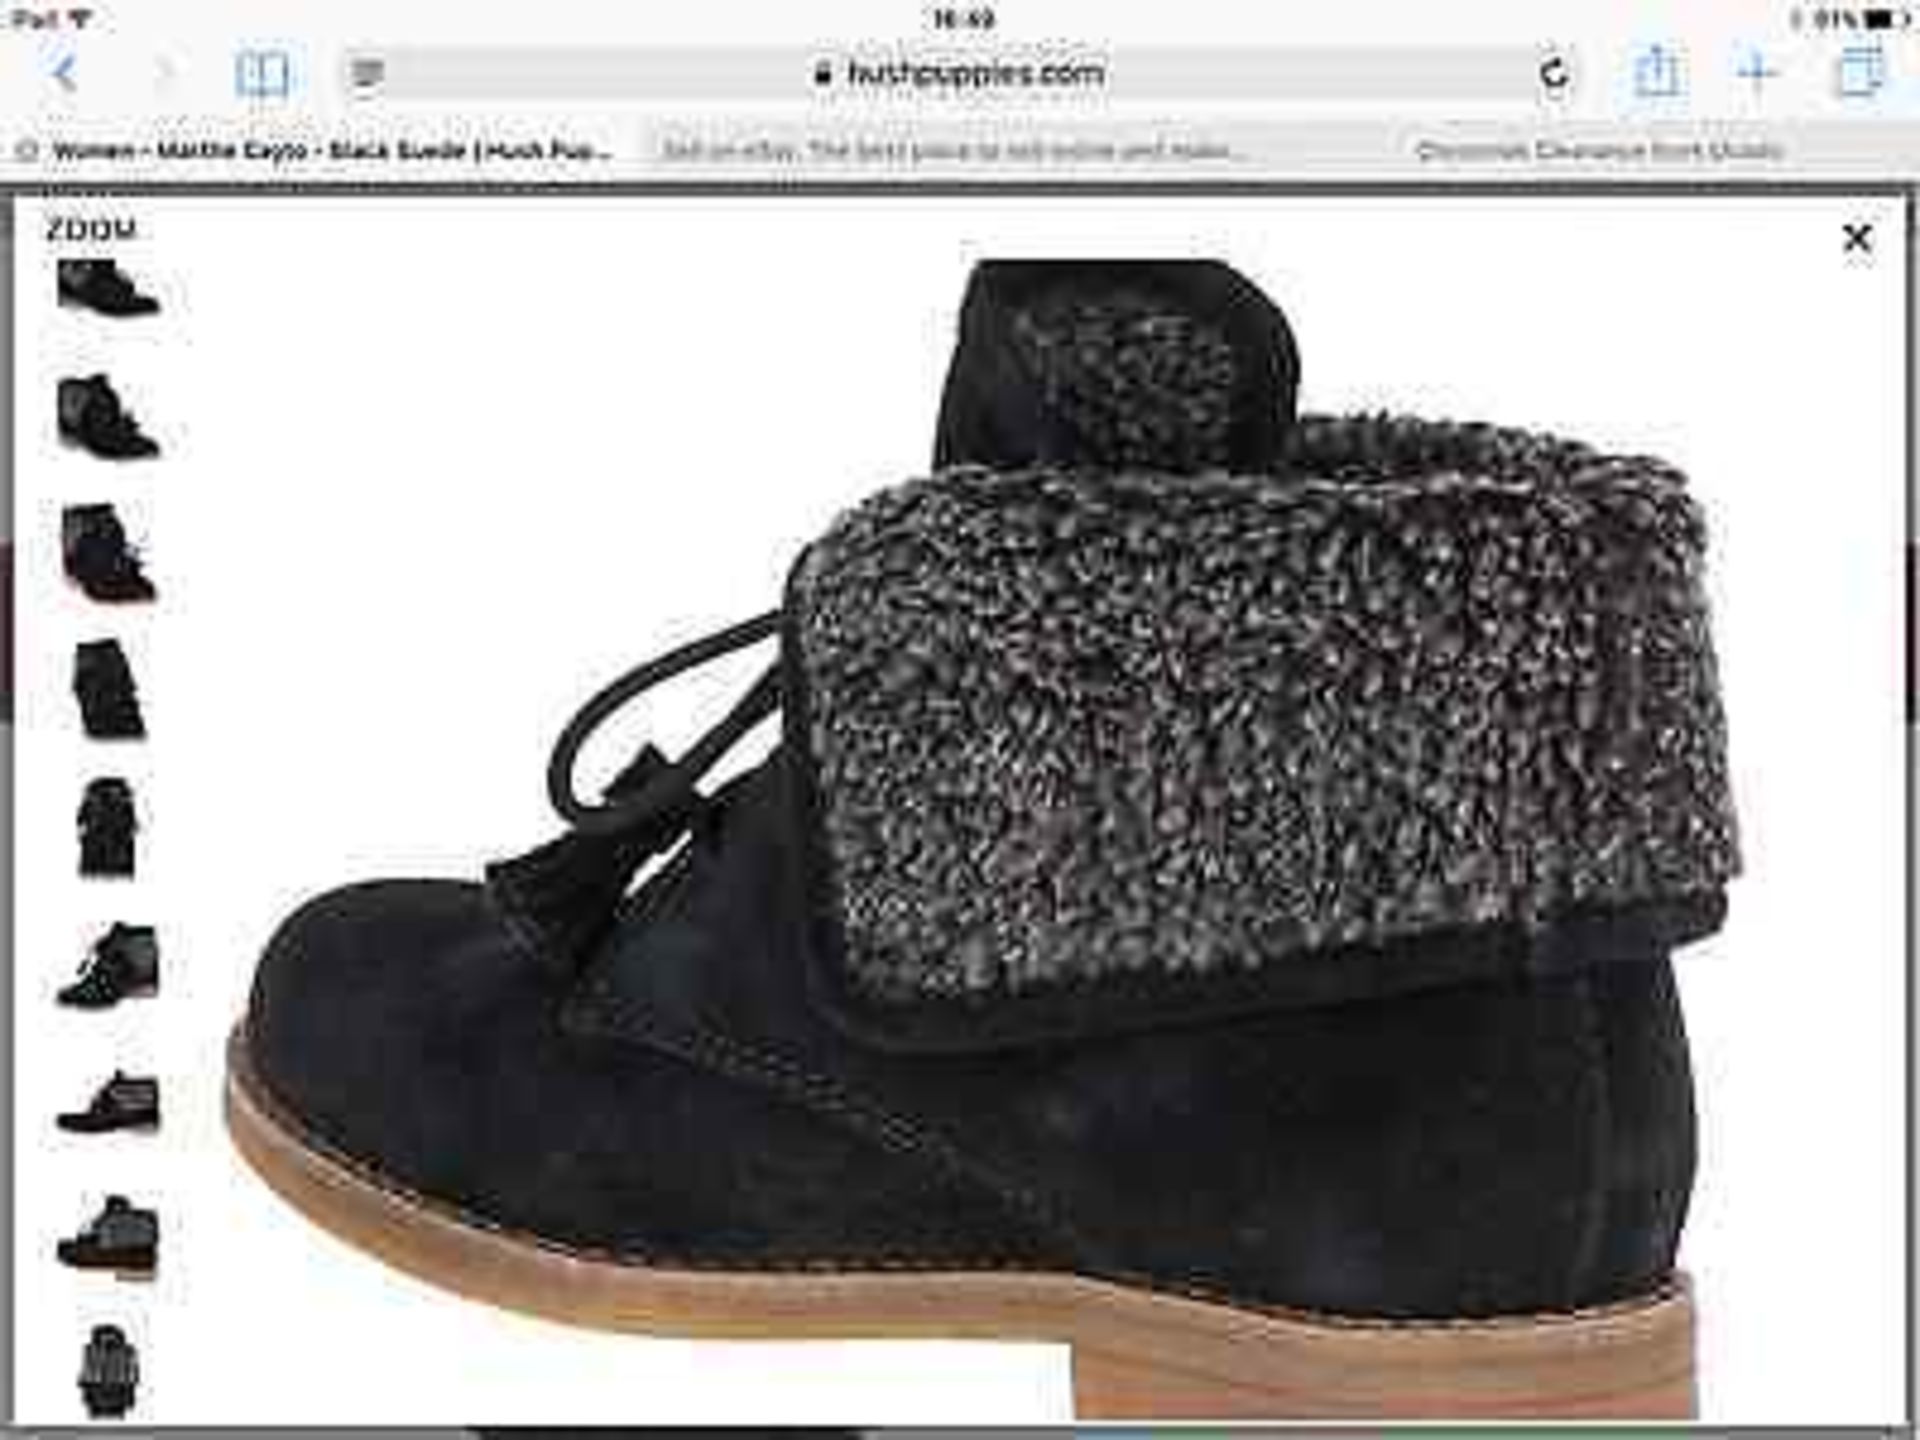 Hush Puppies Black Suede Martha Cayto Ankle Boot, Size UK 7, RRP £100 (New with box) - Image 9 of 12